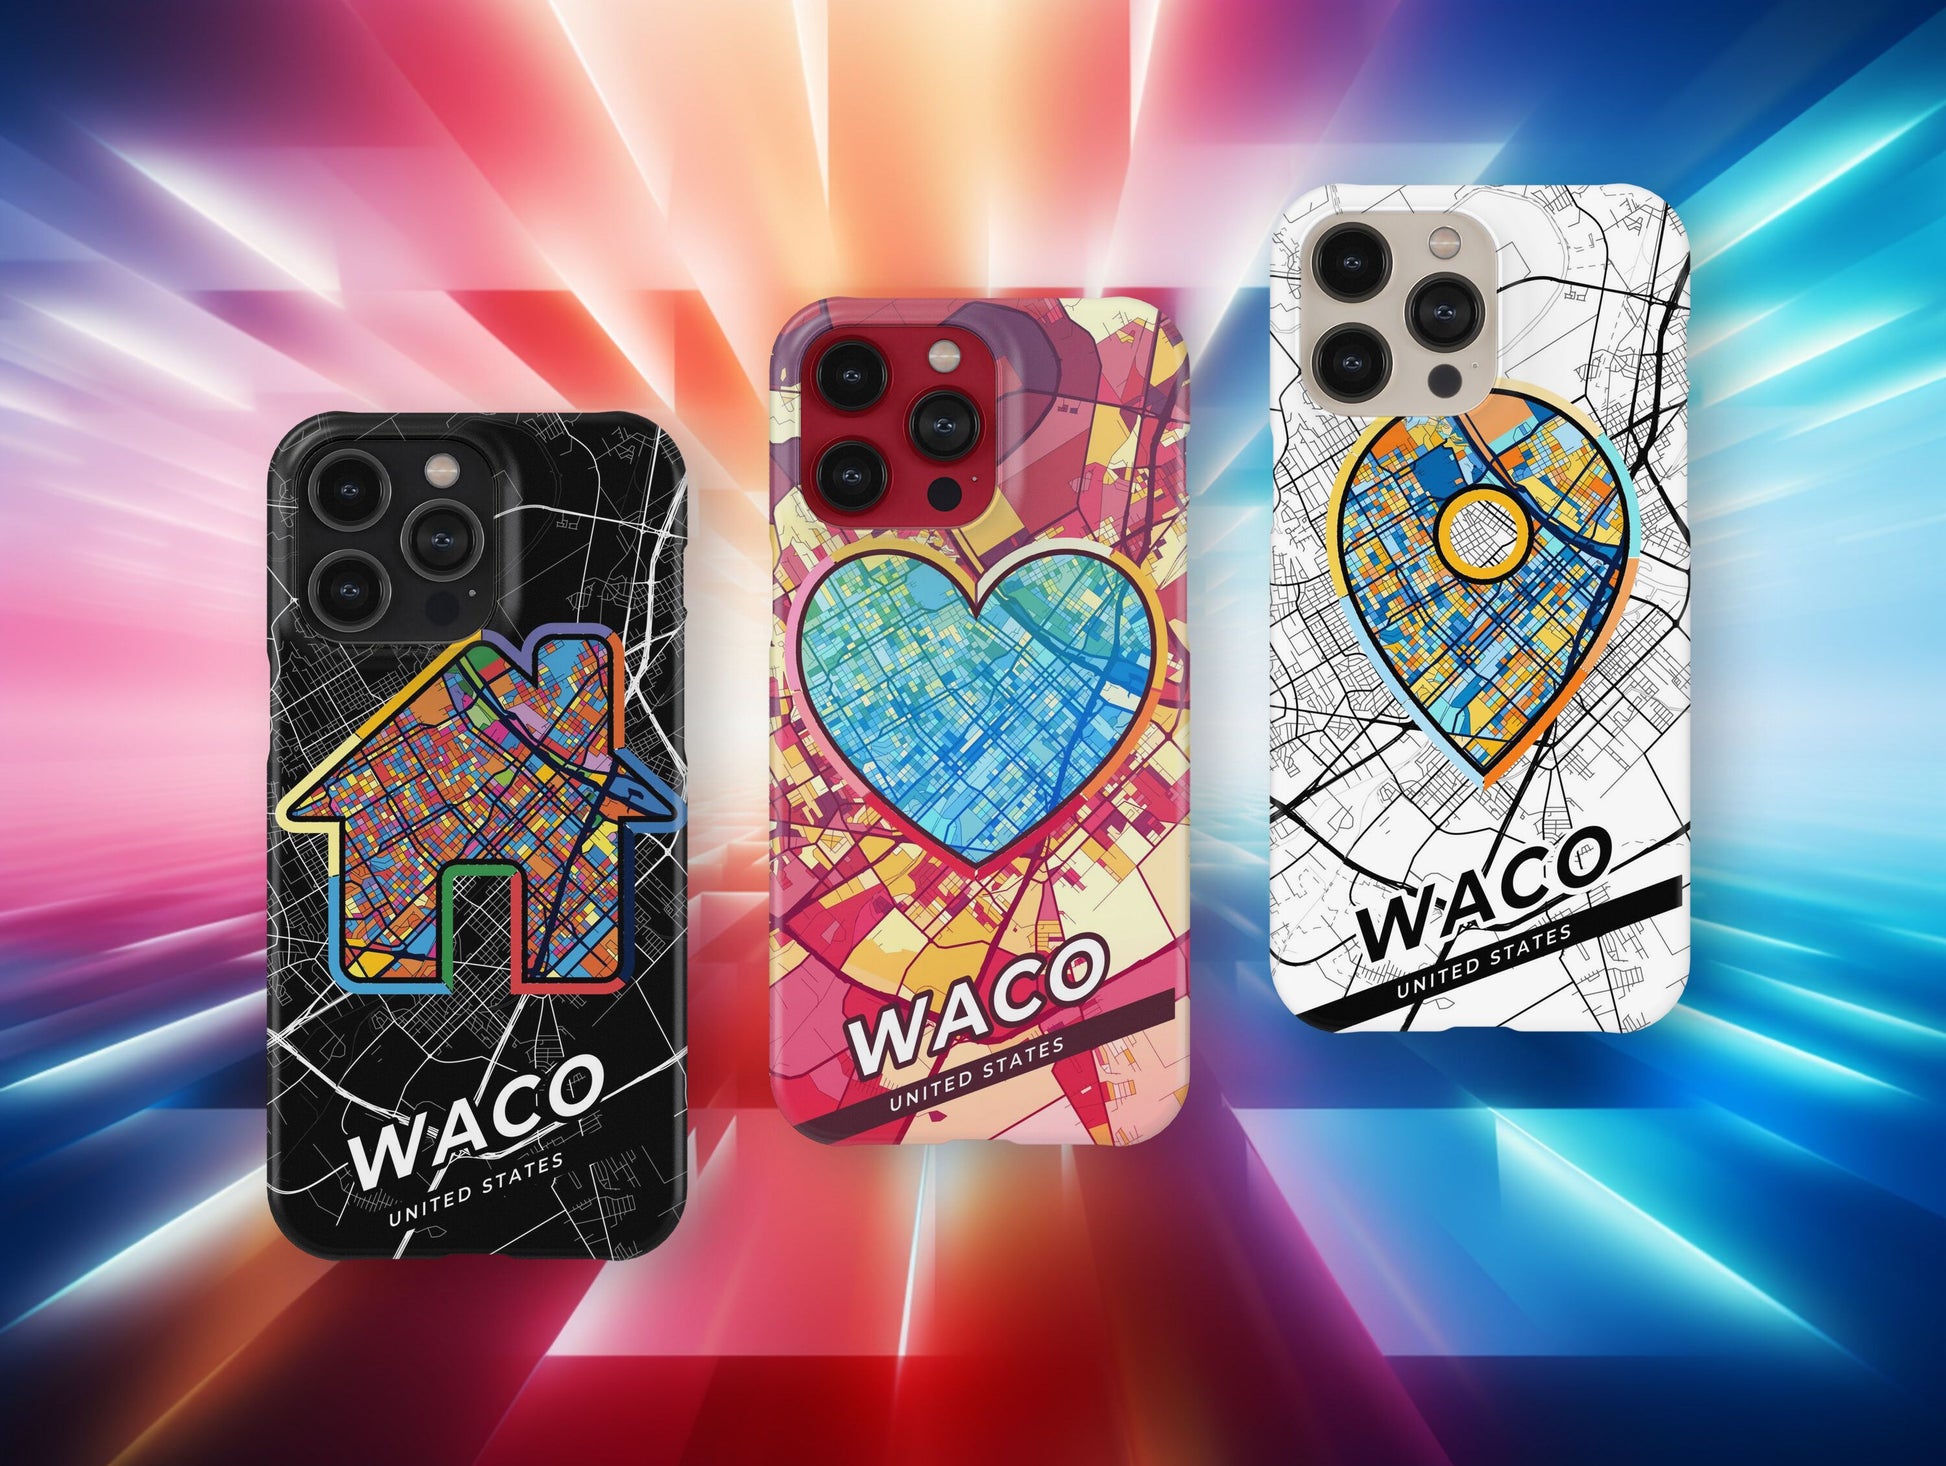 Waco Texas slim phone case with colorful icon